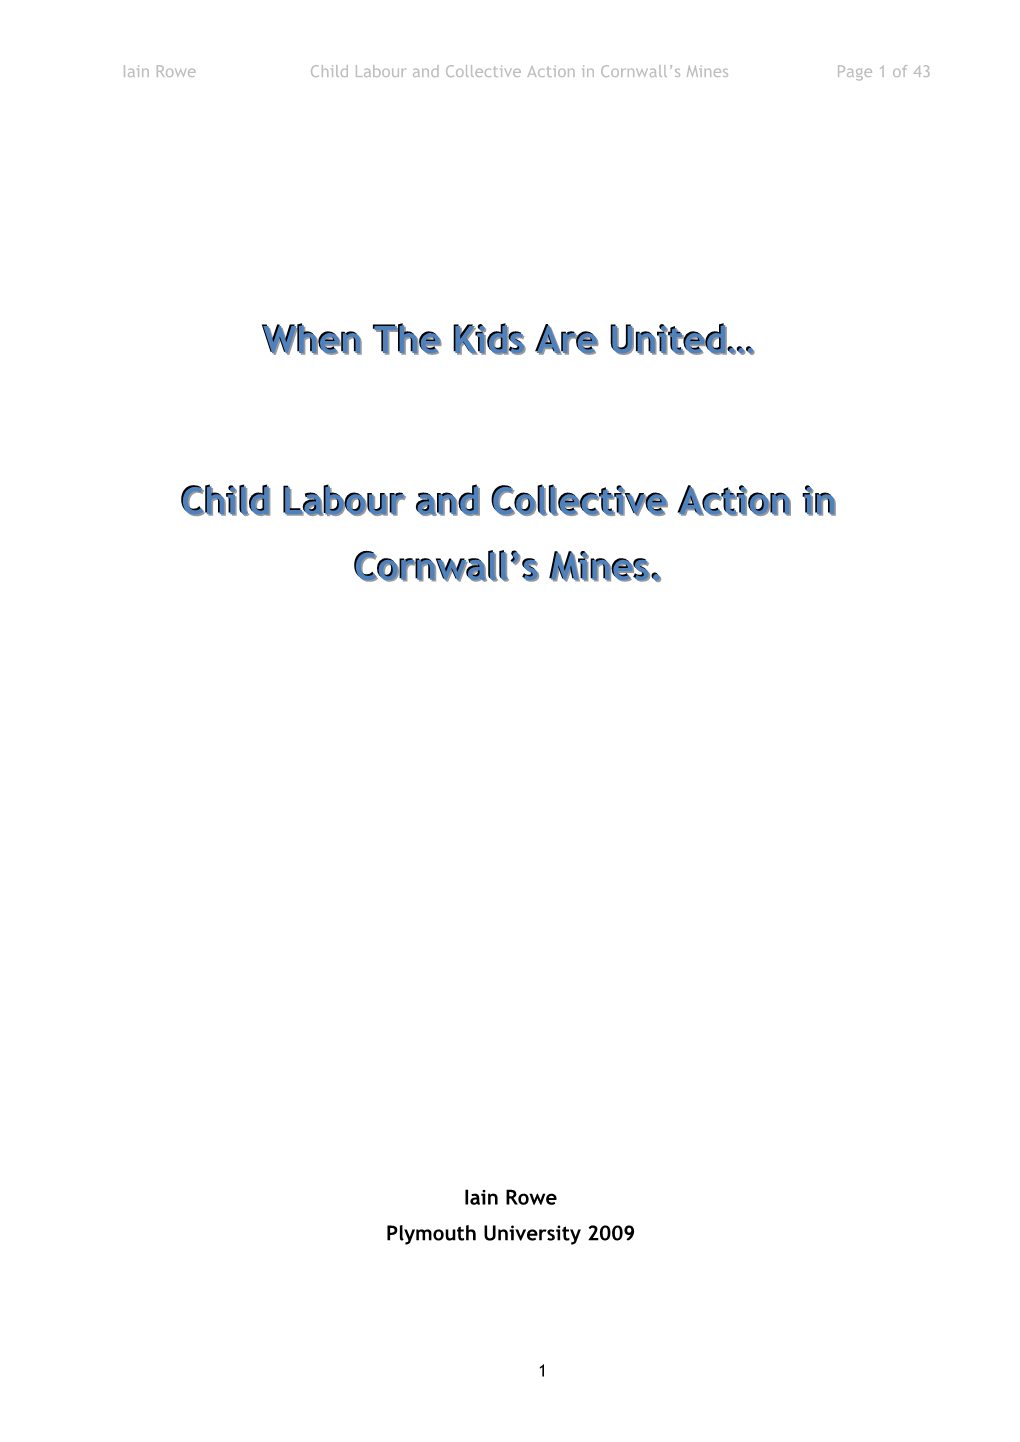 Child Labour and Collective Action in Cornwall's Mines